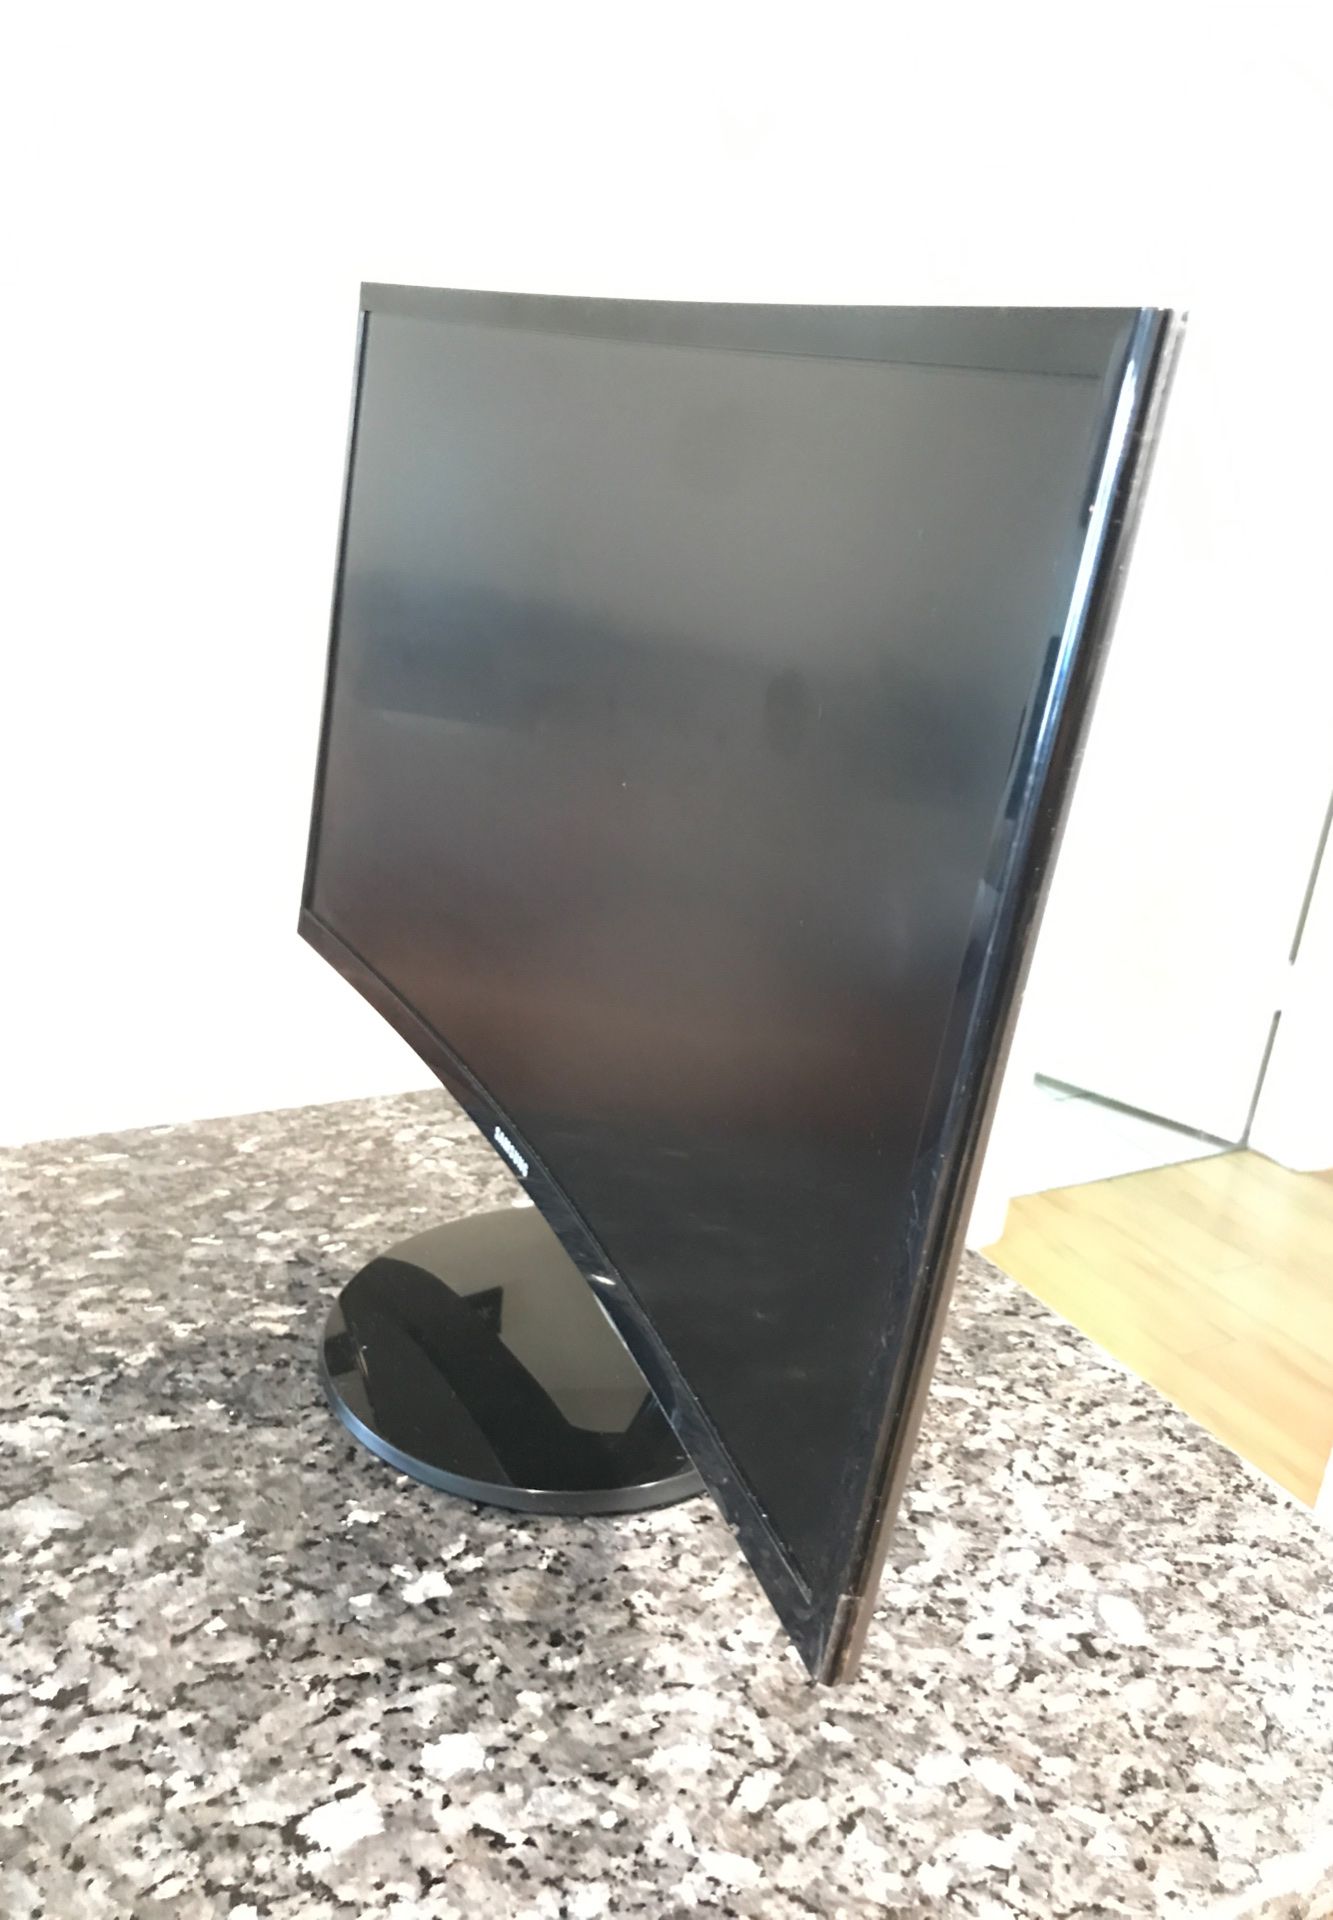 Samsung Curved Monitor 24 inches